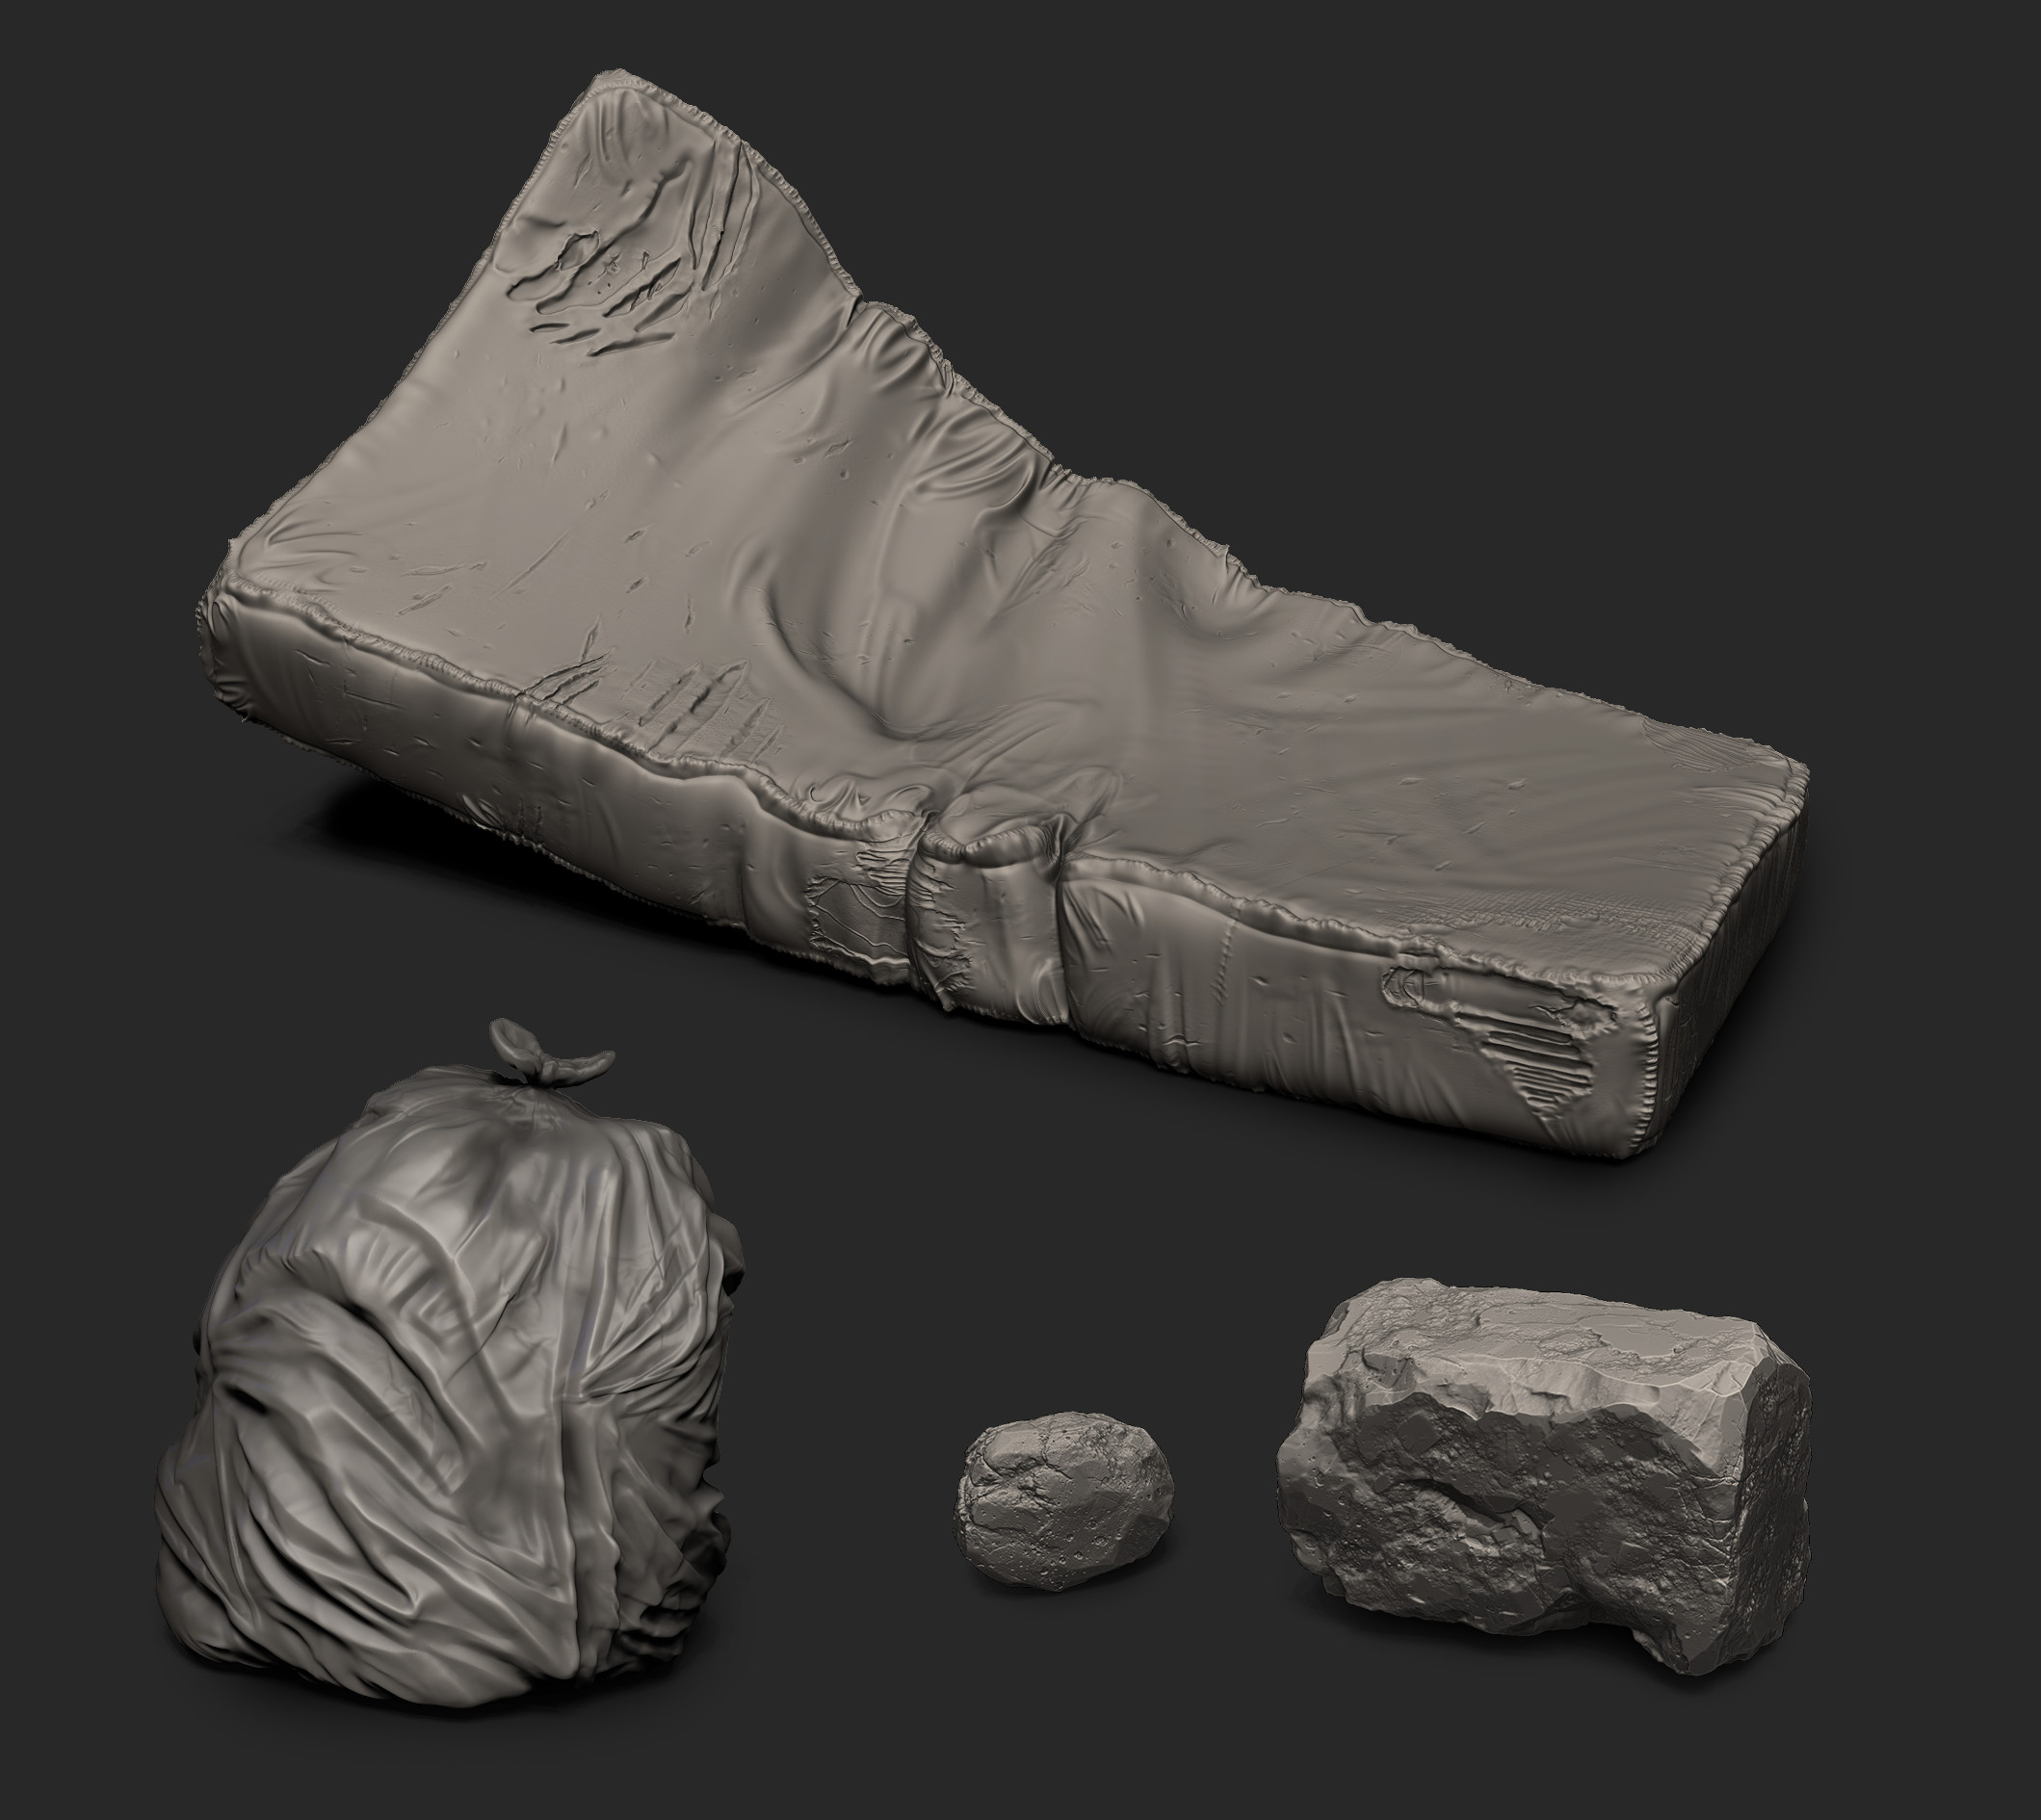 zBrush sculpts for some additional assets